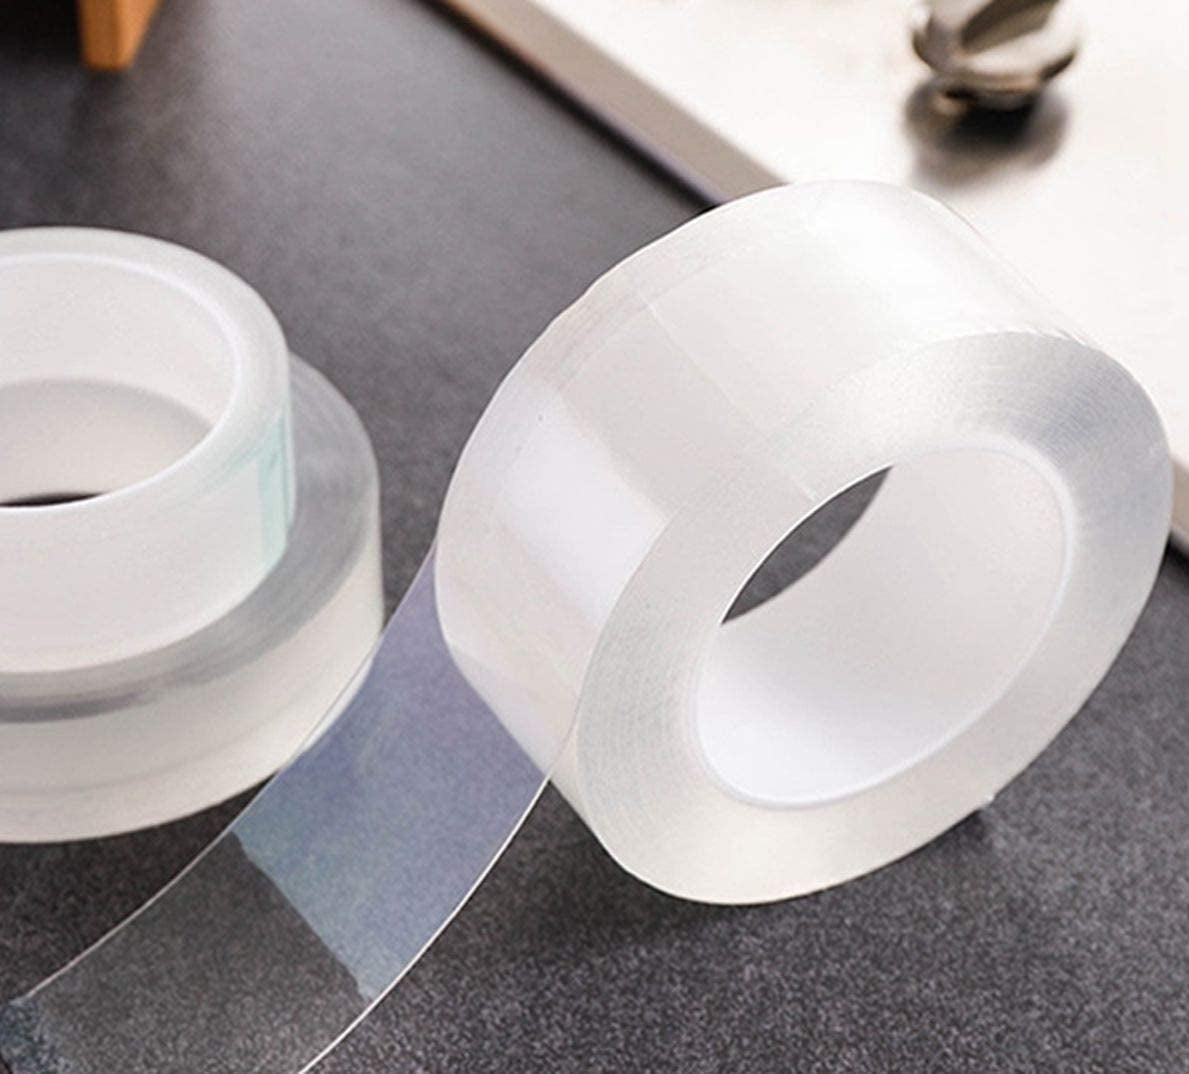 3 Meter Washable Adhesive Grip Tape Nano Tape Reusable Clear Double Sided  Silicone Anti- Slip at Rs 40/piece, Grip Tape in Surat